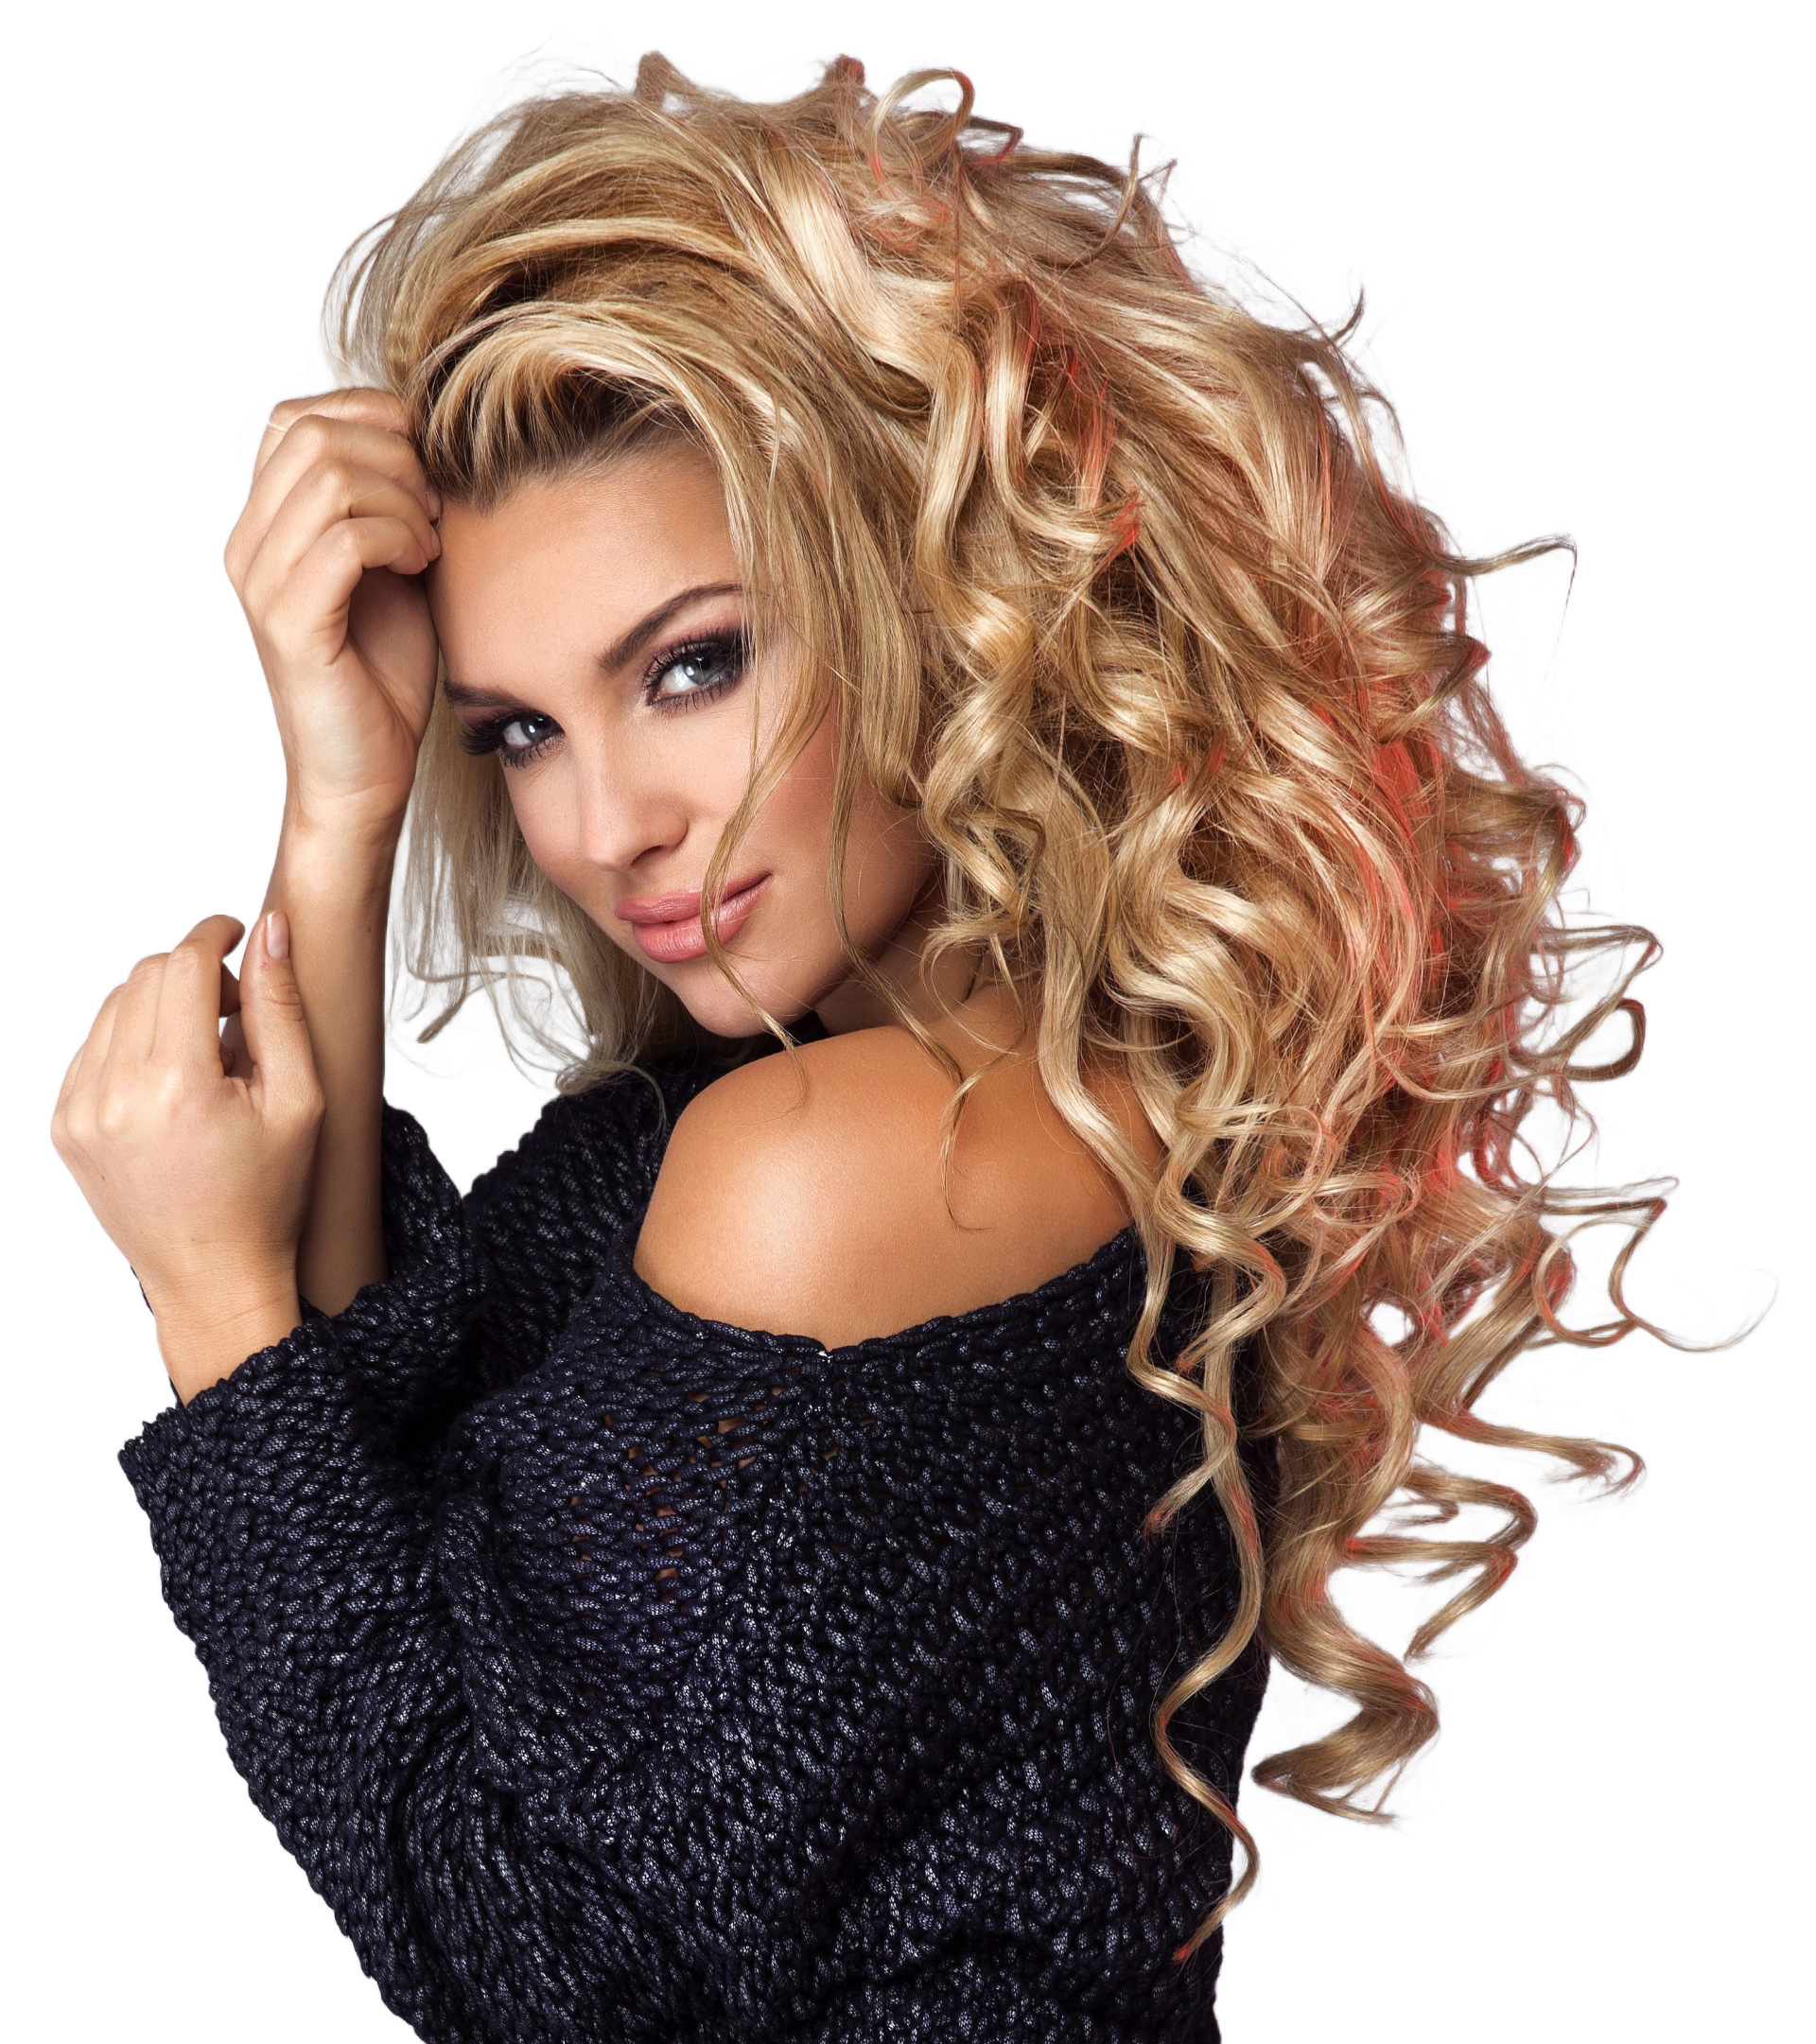 a woman with long curly hair is wearing a black sweater